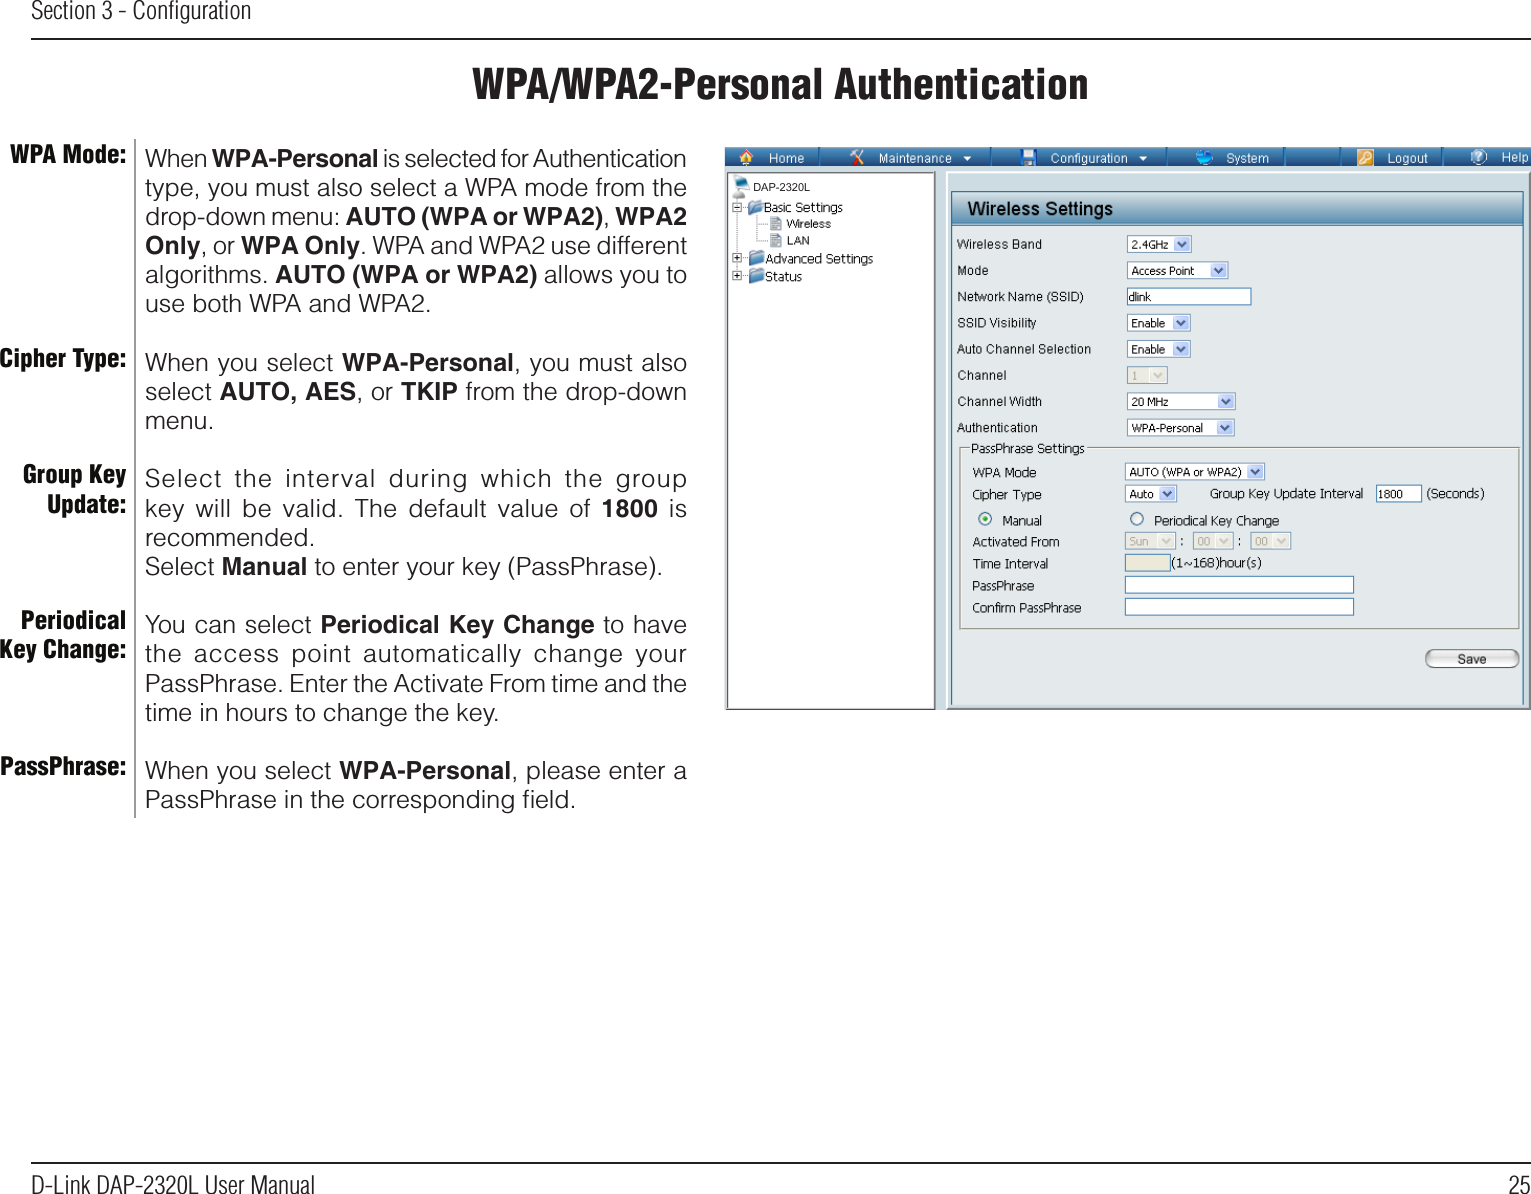 25D-Link DAP-2320L User ManualSection 3 - ConﬁgurationWPA/WPA2-Personal AuthenticationWhen WPA-Personal is selected for Authentication type, you must also select a WPA mode from the drop-down menu: AUTO (WPA or WPA2), WPA2 Only, or WPA Only. WPA and WPA2 use different algorithms. AUTO (WPA or WPA2) allows you to use both WPA and WPA2.When you select WPA-Personal, you must also select AUTO, AES, or TKIP from the drop-down menu.Select  the  interval  during  which  the  group key  will  be  valid.  The  default  value  of  1800  is recommended.Select Manual to enter your key (PassPhrase). You can select Periodical Key Change to have the  access  point  automatically  change  your PassPhrase. Enter the Activate From time and the time in hours to change the key.When you select WPA-Personal, please enter a PassPhrase in the corresponding ﬁeld.WPA Mode: Cipher Type:Group Key Update:Periodical Key Change:PassPhrase:DAP-2320L